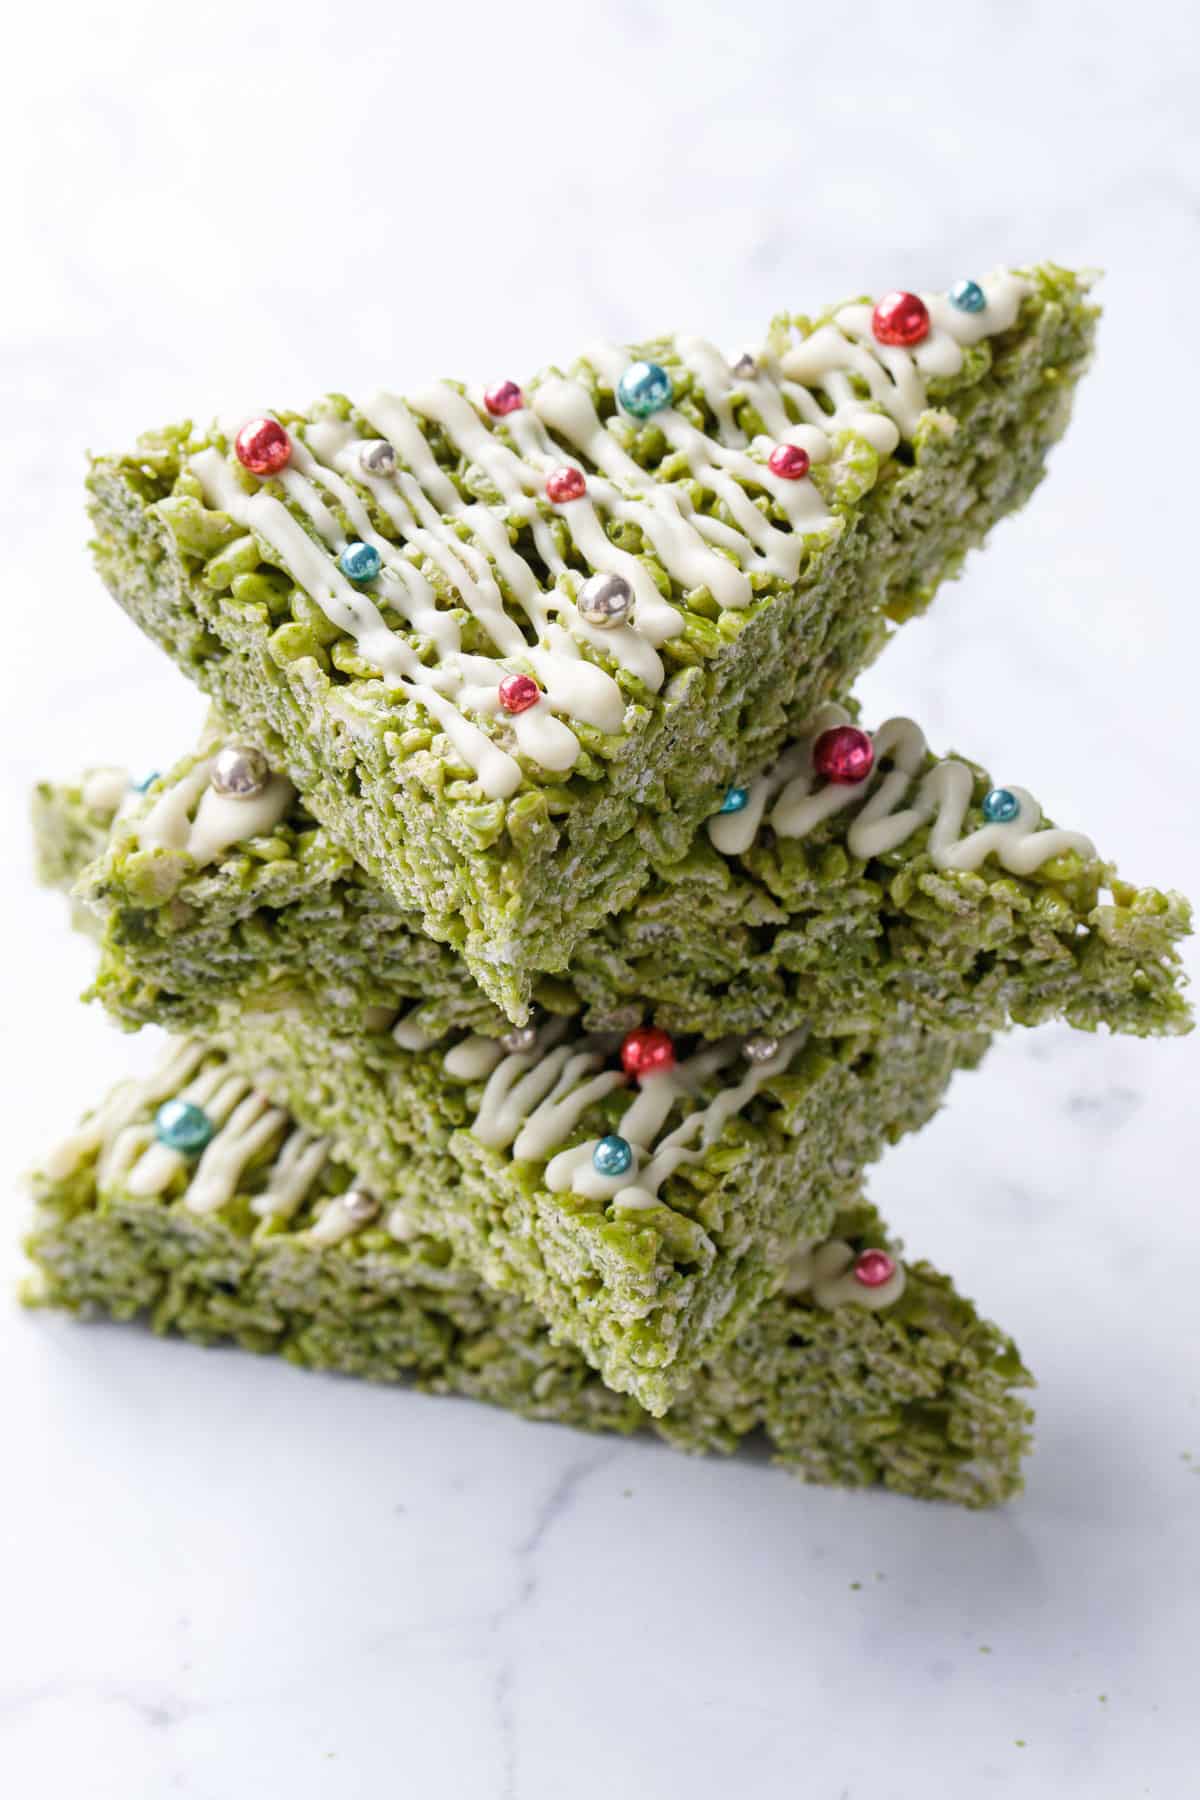 Stack of triangular Matcha Rice Crispy Treats decorated to look like Christmas trees on a marble background.